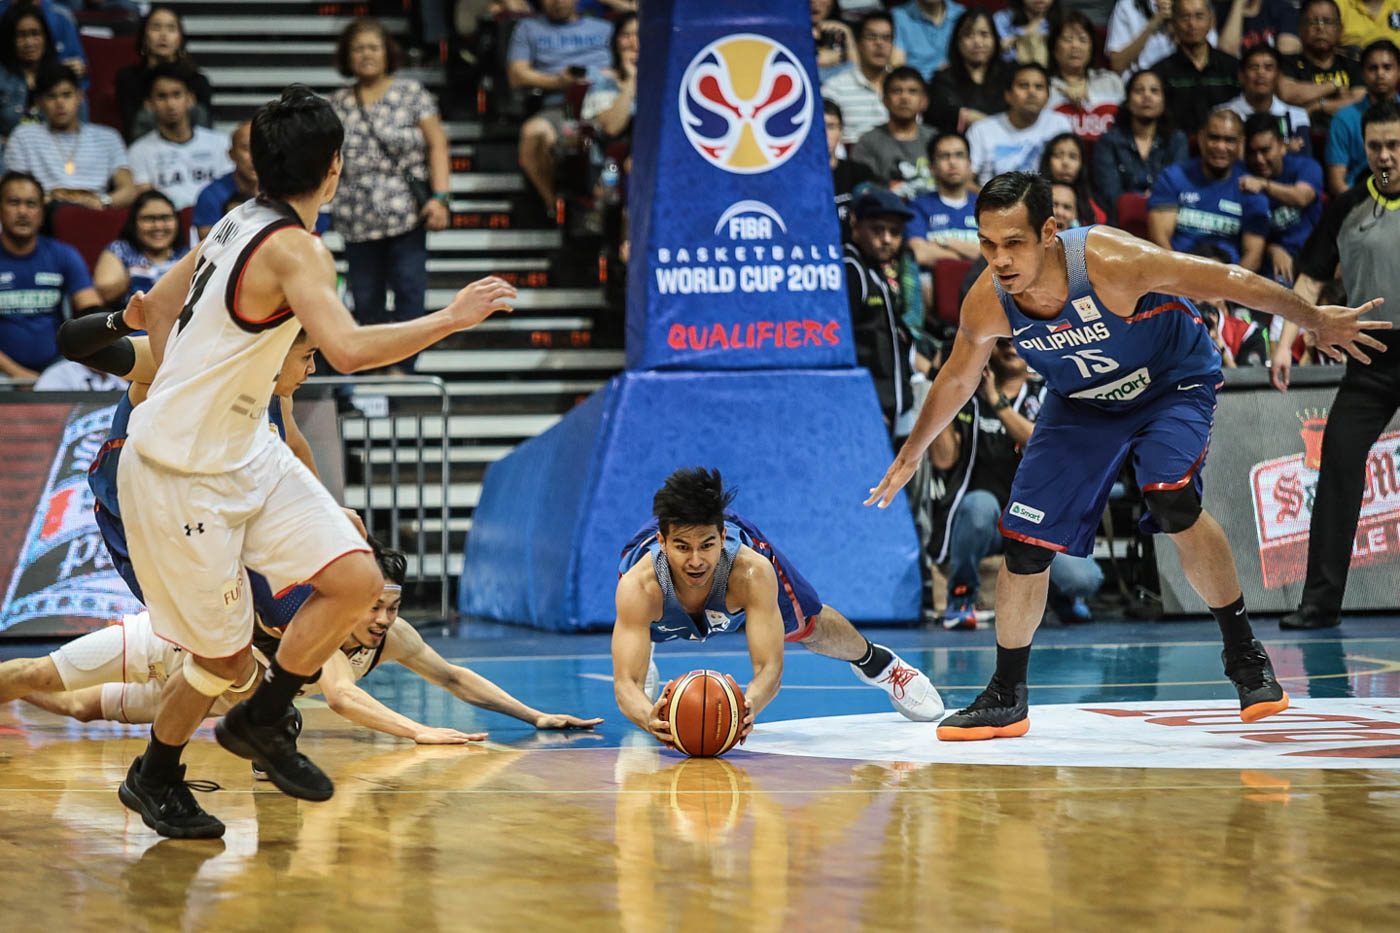 Castro believes Ravena will take over as Gilas’ starting point guard